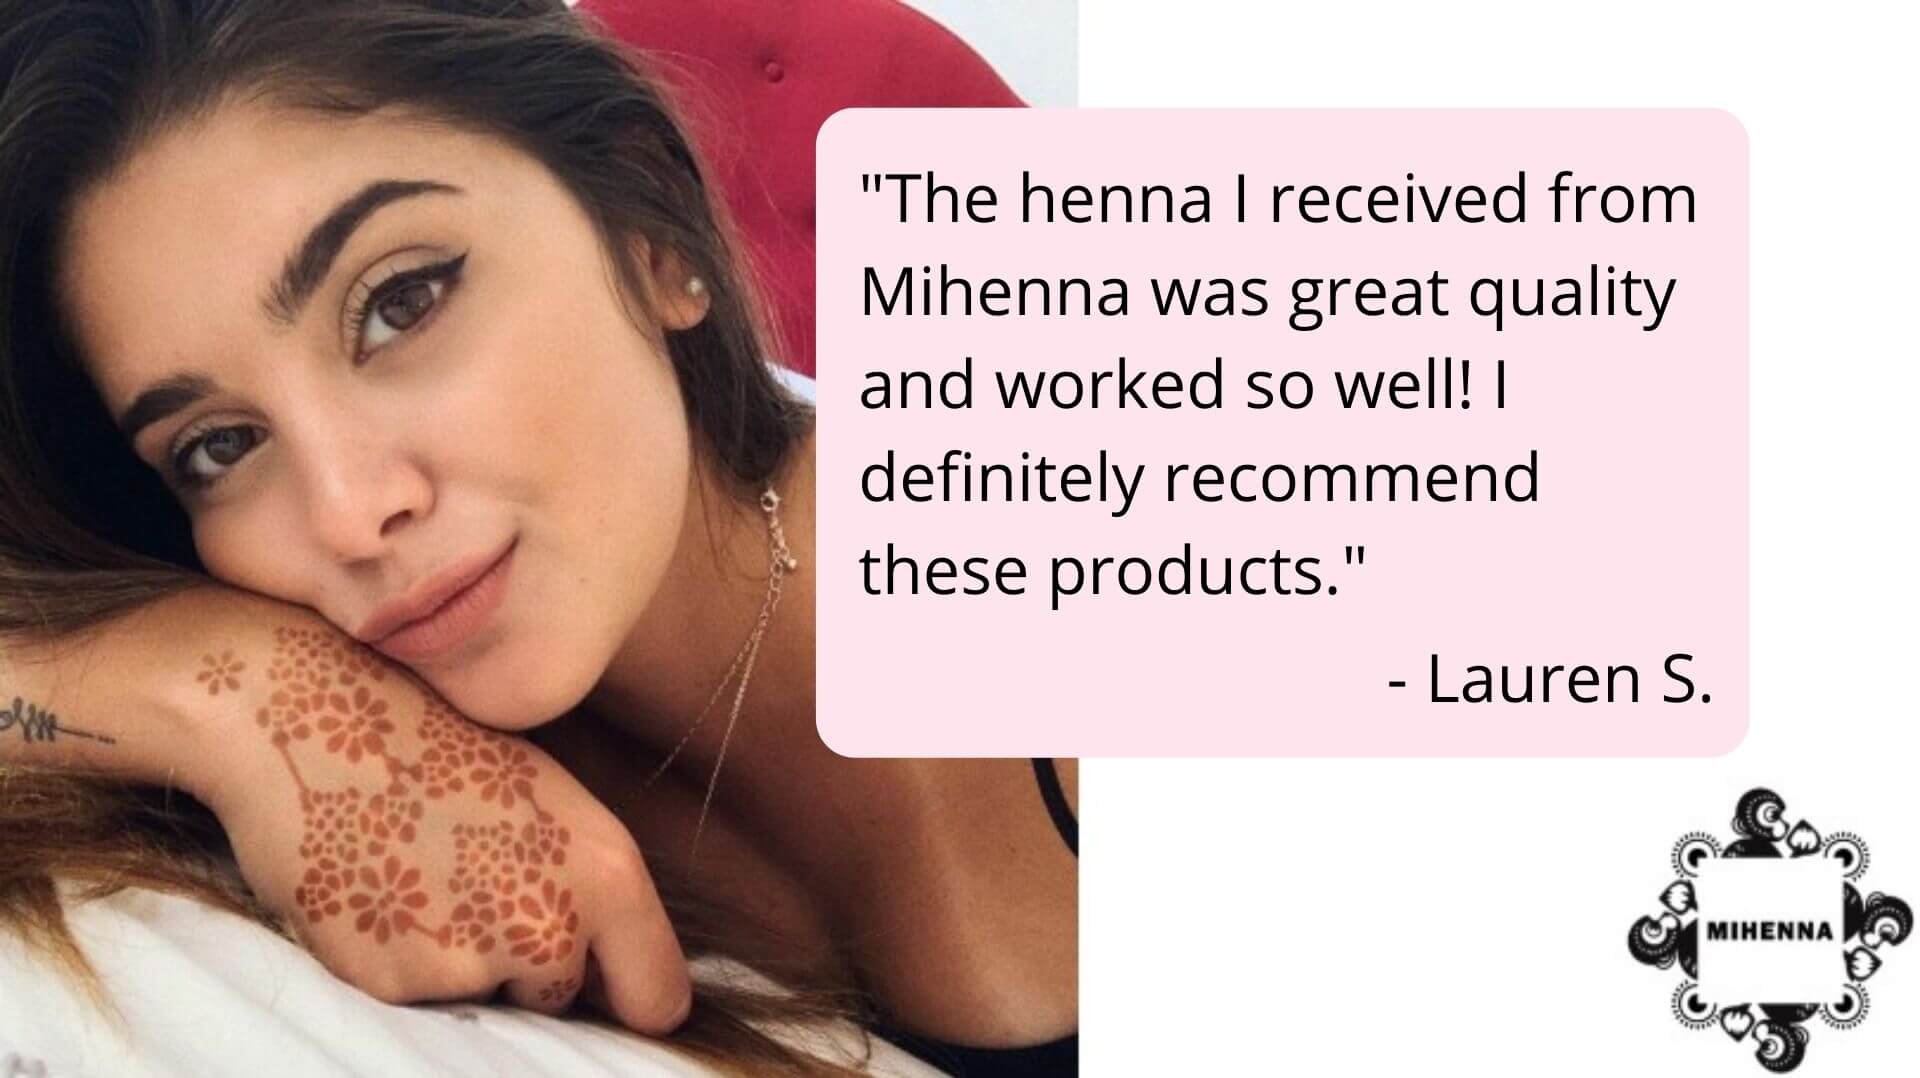 Mihenna Reviews - "The henna I received from Mihenna was great quality and worked so well! I definitely recommend these products." - Lauren S.